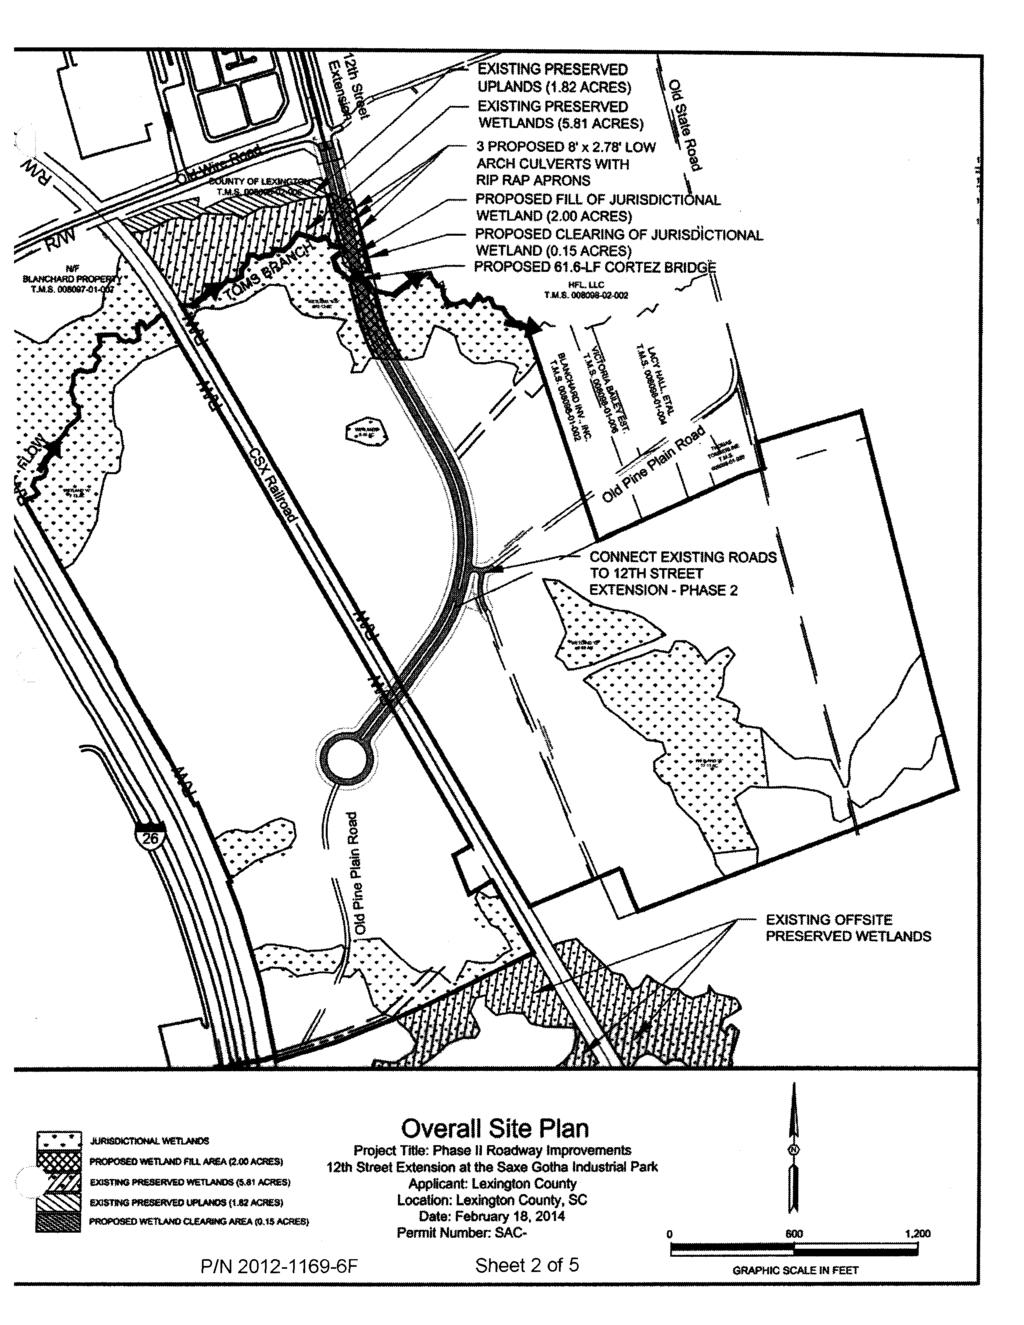 PRESERVED UPLANDS (1.82 ACRES) EXISTING PRESERVED WETLANDS (5.81 ACRES) 3 PROPOSED 8' x 2.78'LOW ARCH CULVERTS WITH RIP RAP APRONS PROPOSED FILL OF JURISDICTIONAL WETLAND (2.